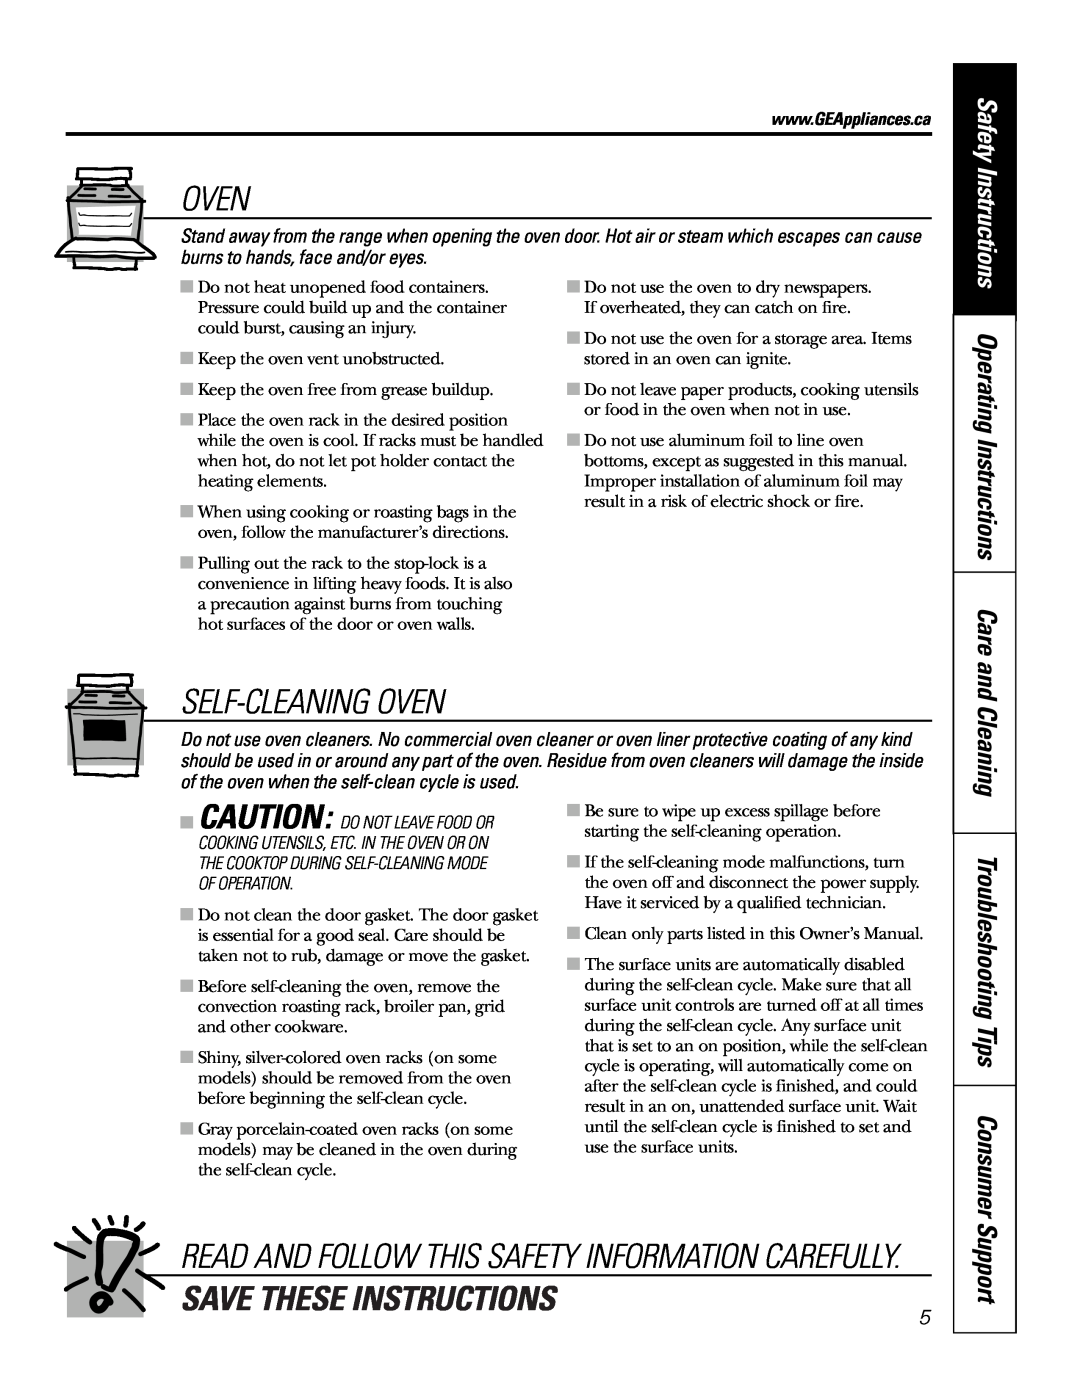 GE JCB905 Oven, Self-Cleaningoven, Save These Instructions, Troubleshooting Tips Consumer, Operating Instructions Care and 